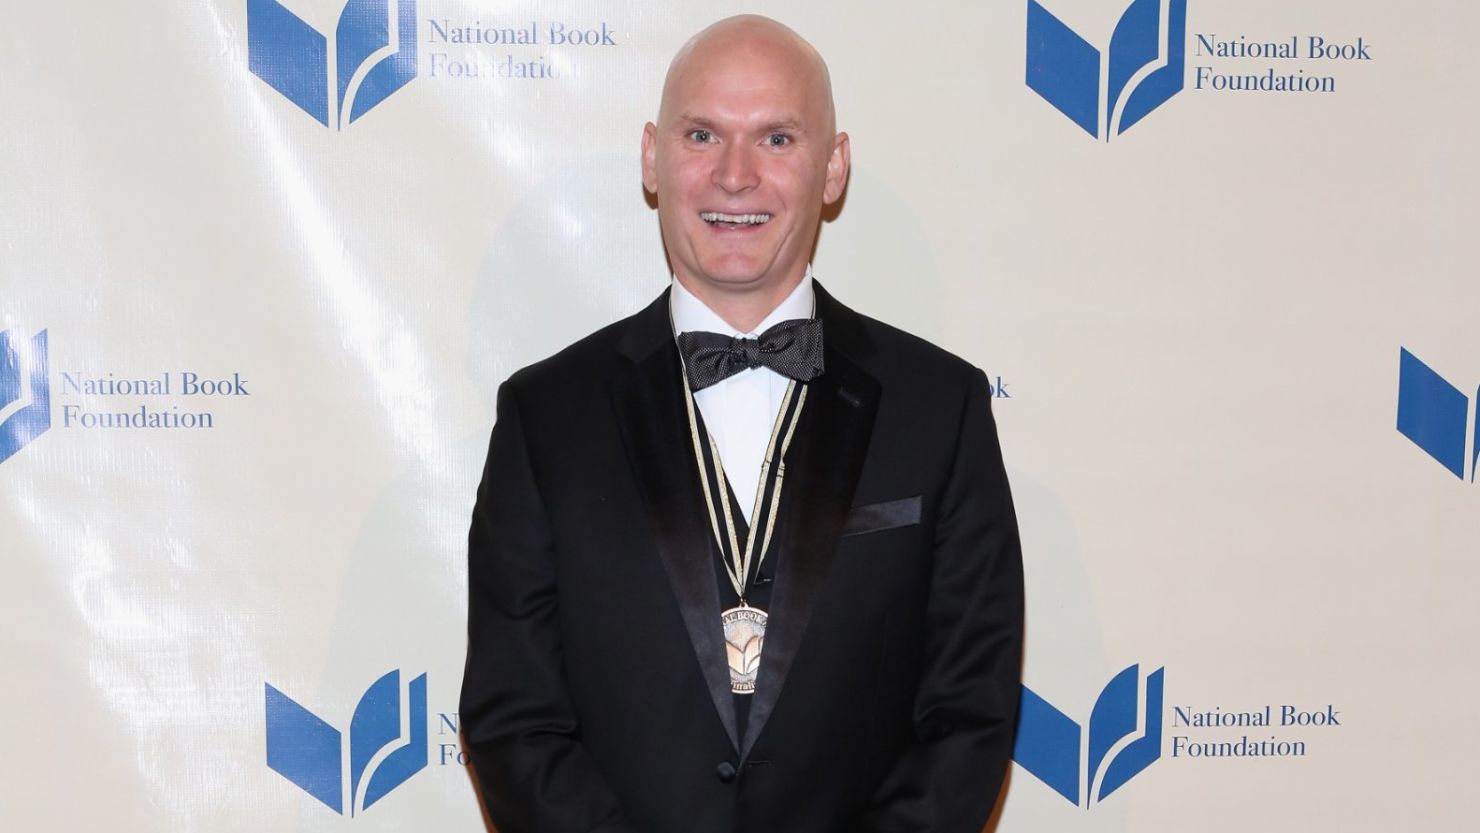 Anthony Doerr, a finalist for the National Book Award last year, took home the Pulitzer Monday.